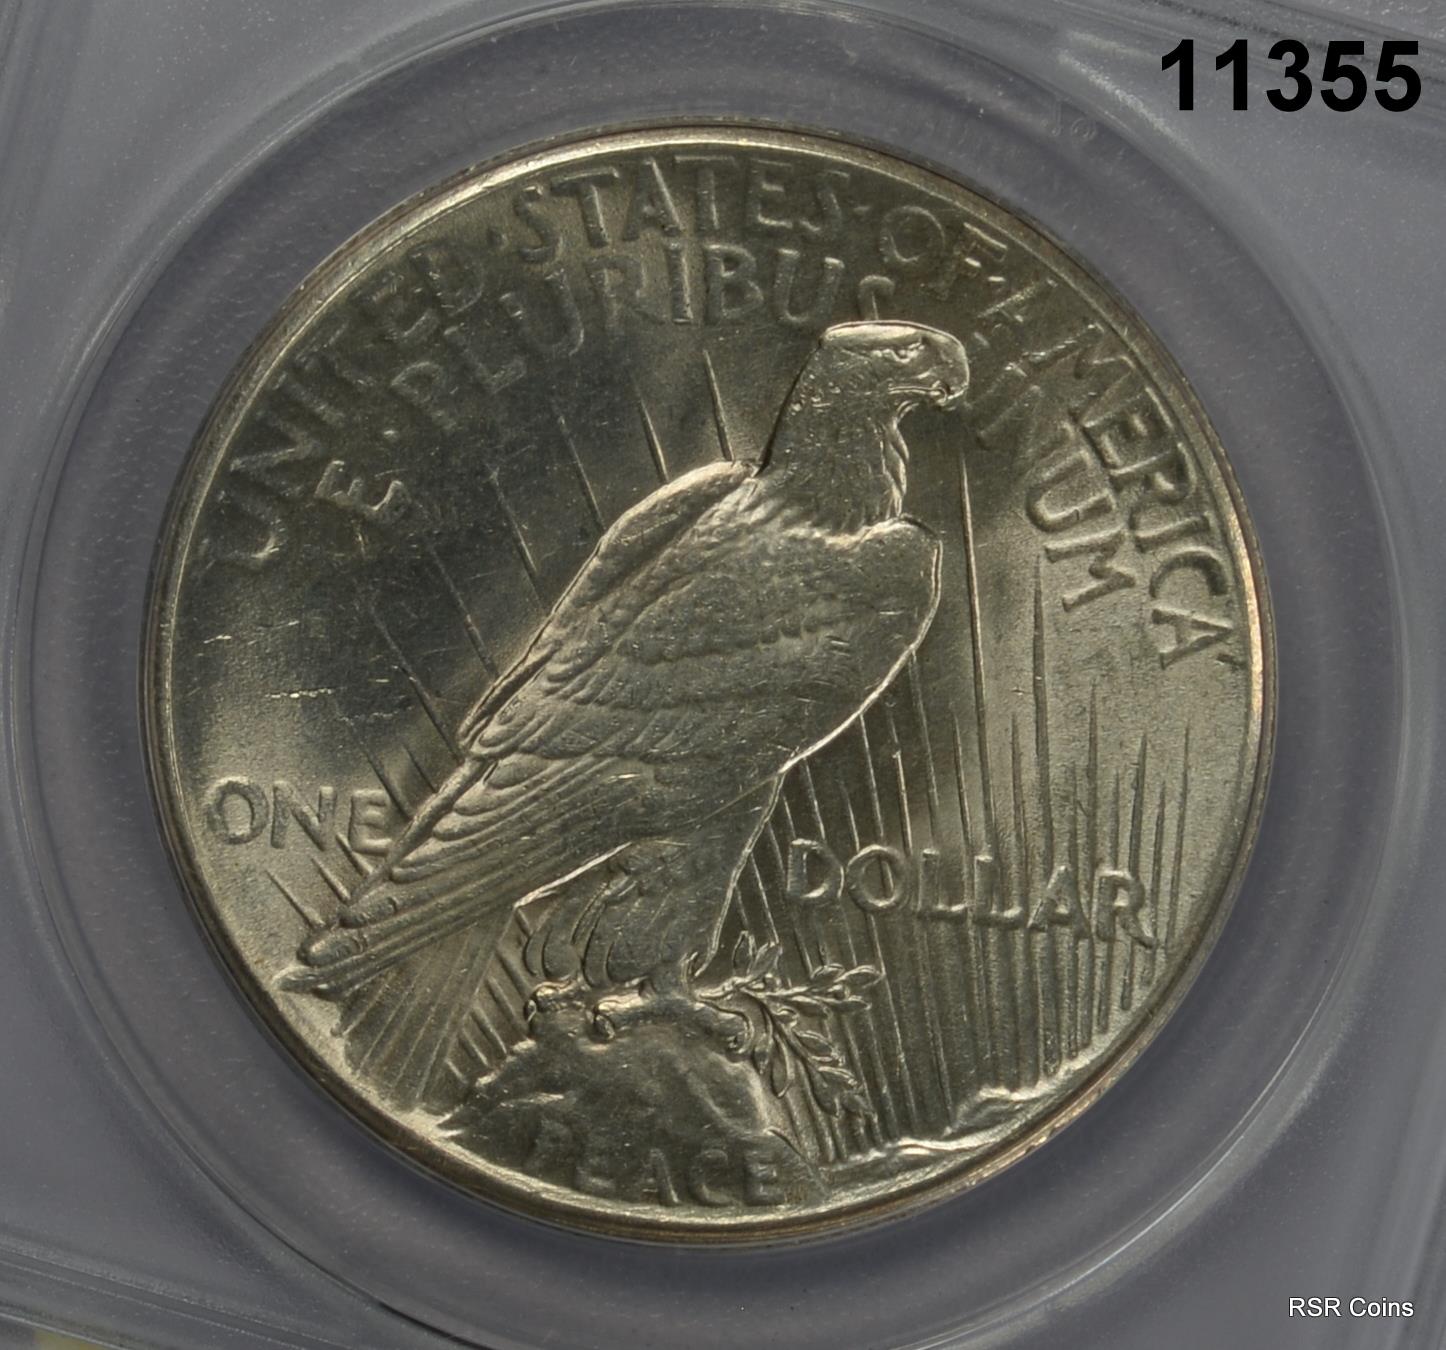 1927 PEACE SILVER DOLLAR ANACS CERTIFIED AU58 CLEANED MINTAGE 848,000 #11355